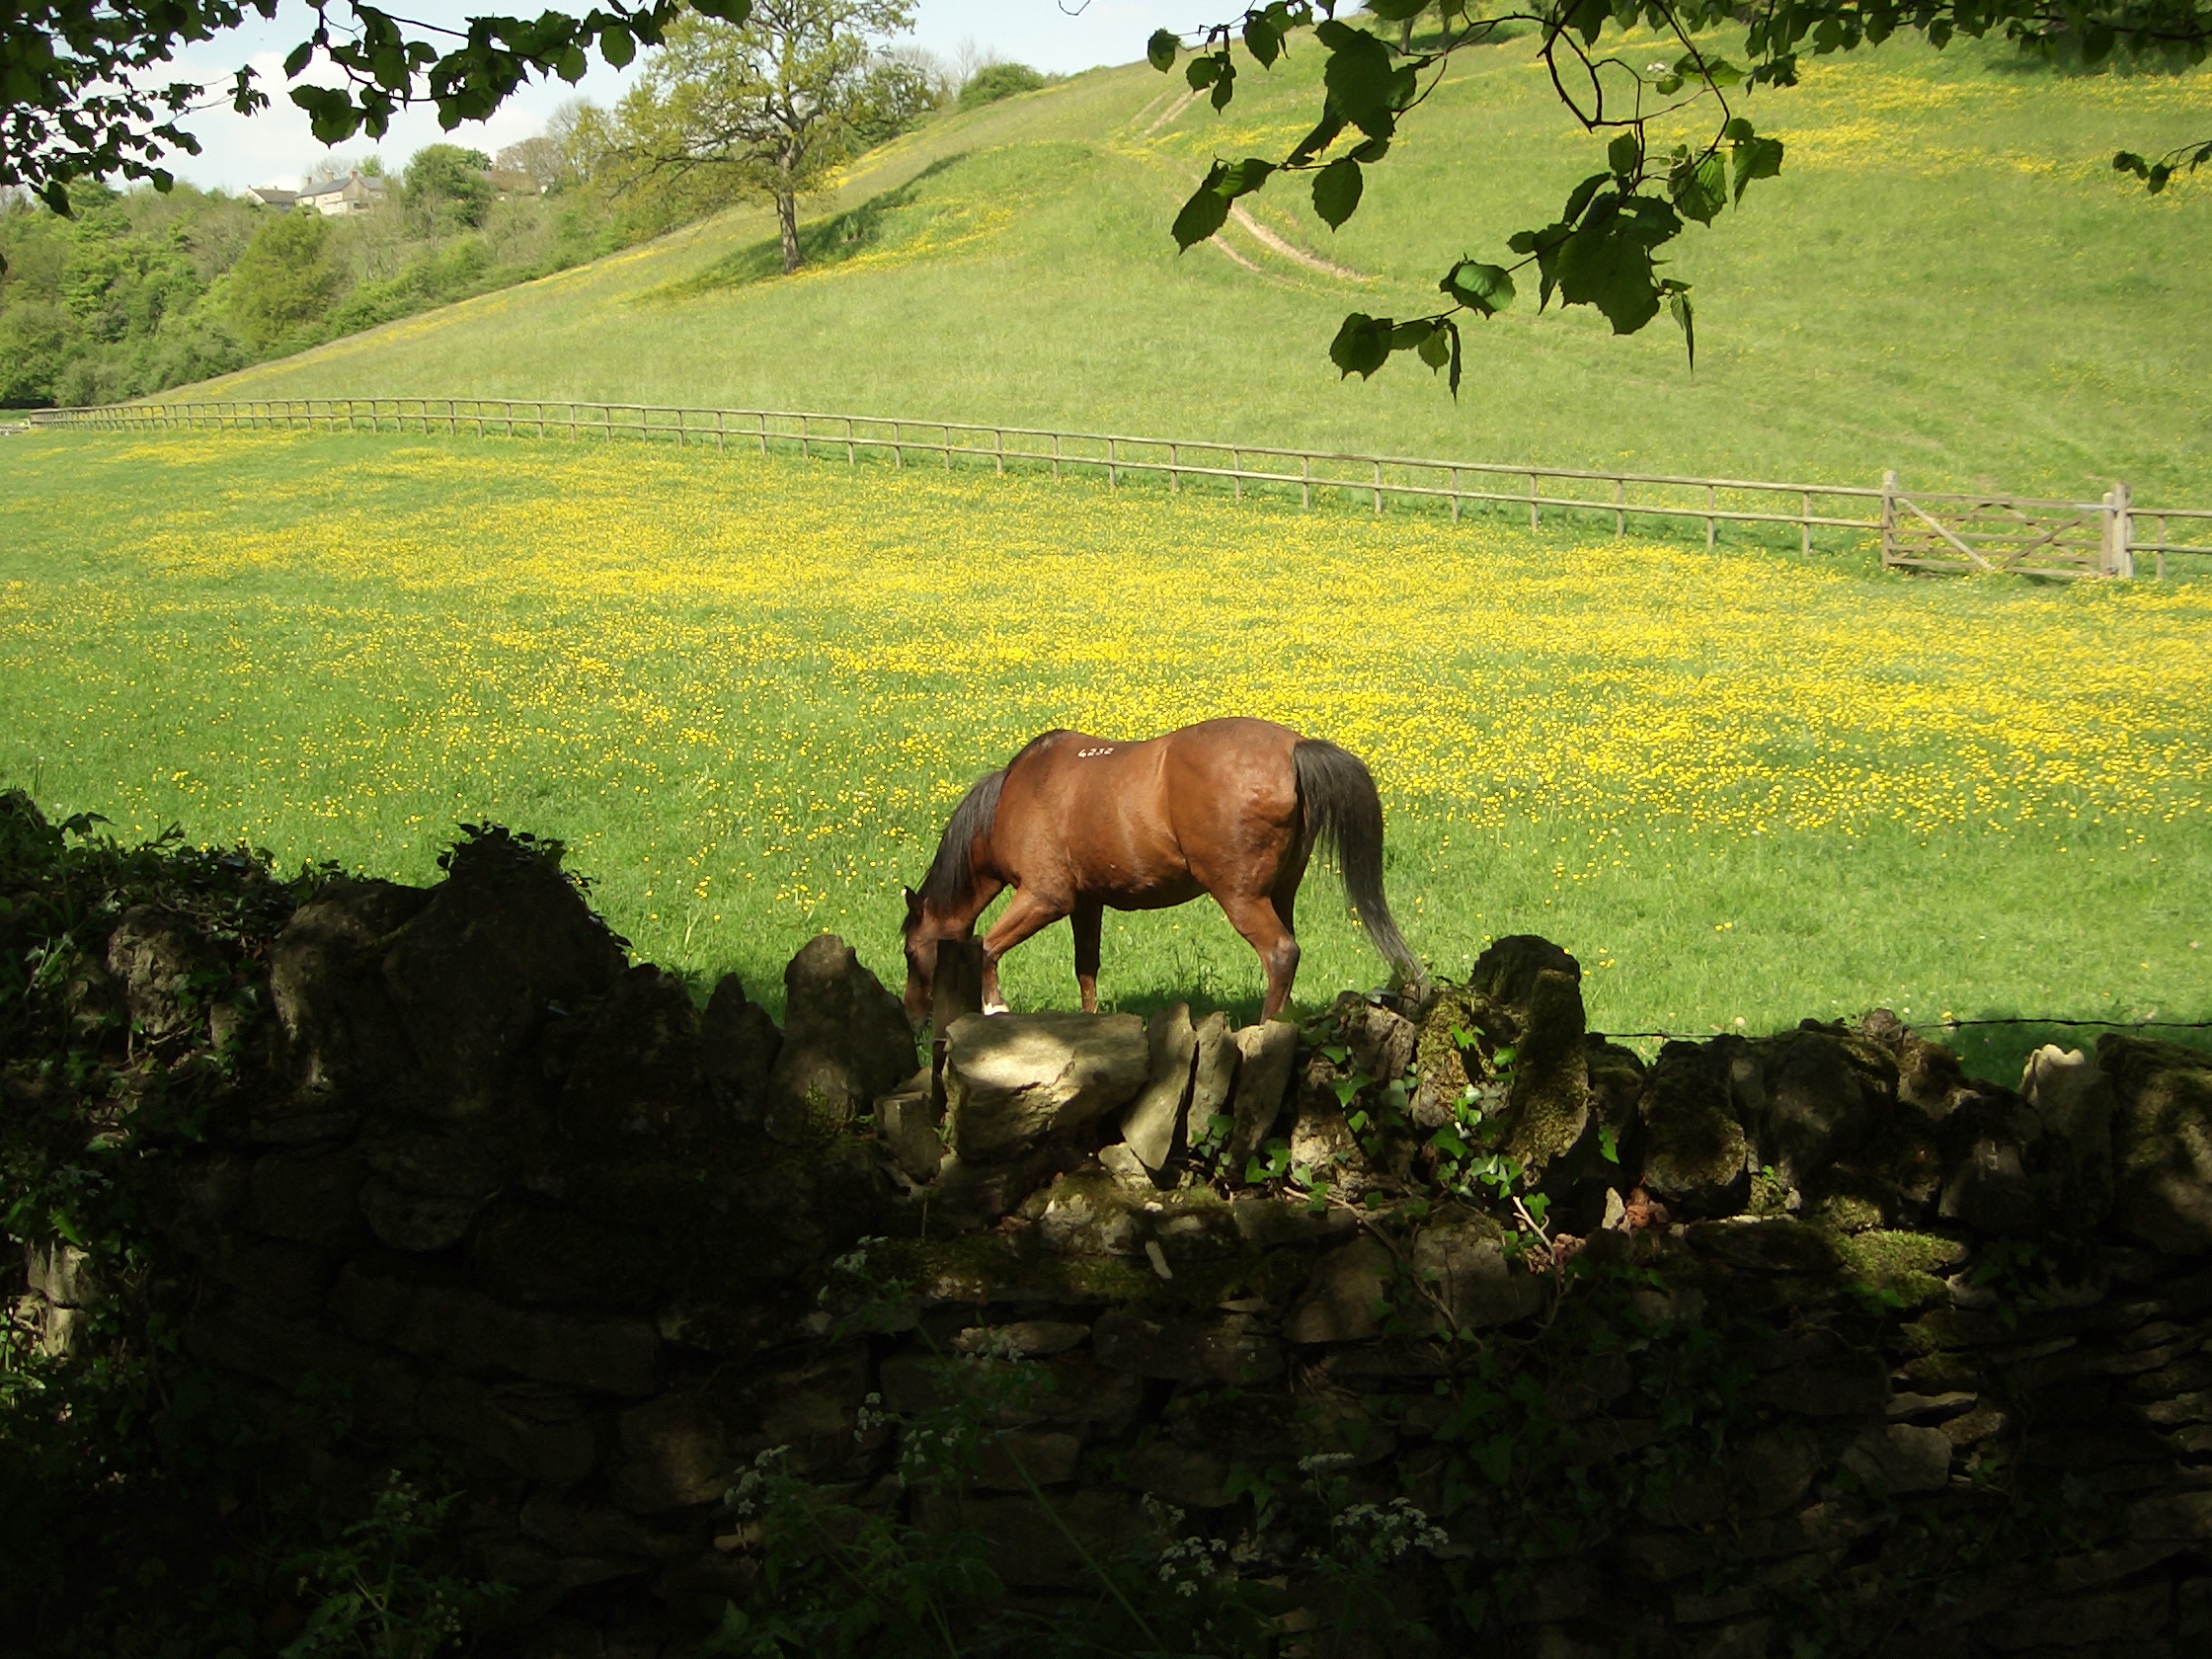  Horse in a field of buttercups English Cotswold countryside in Spring